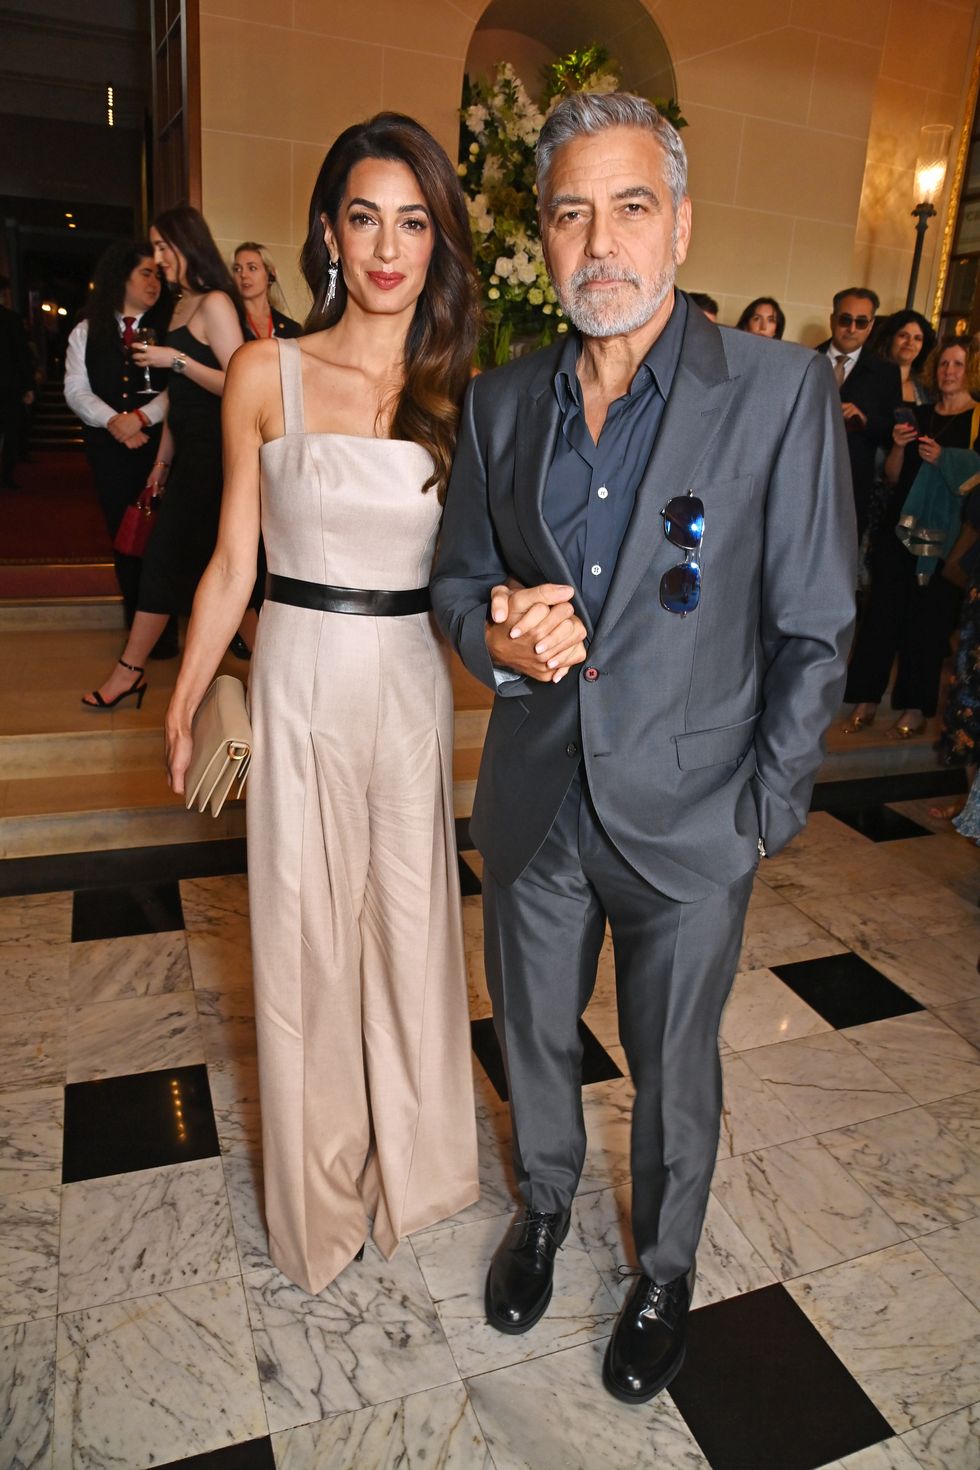 LONDON, UNITED KINGDOM - May 16 Amal Clooney and George Clooney attend The Prince's Trust Awards and the tkmax Homesense Awards 2023 at Royal Drury Lane Theater in London, United Kingdom on May 16, 2023 Photo credit: Dave Benegetti Images